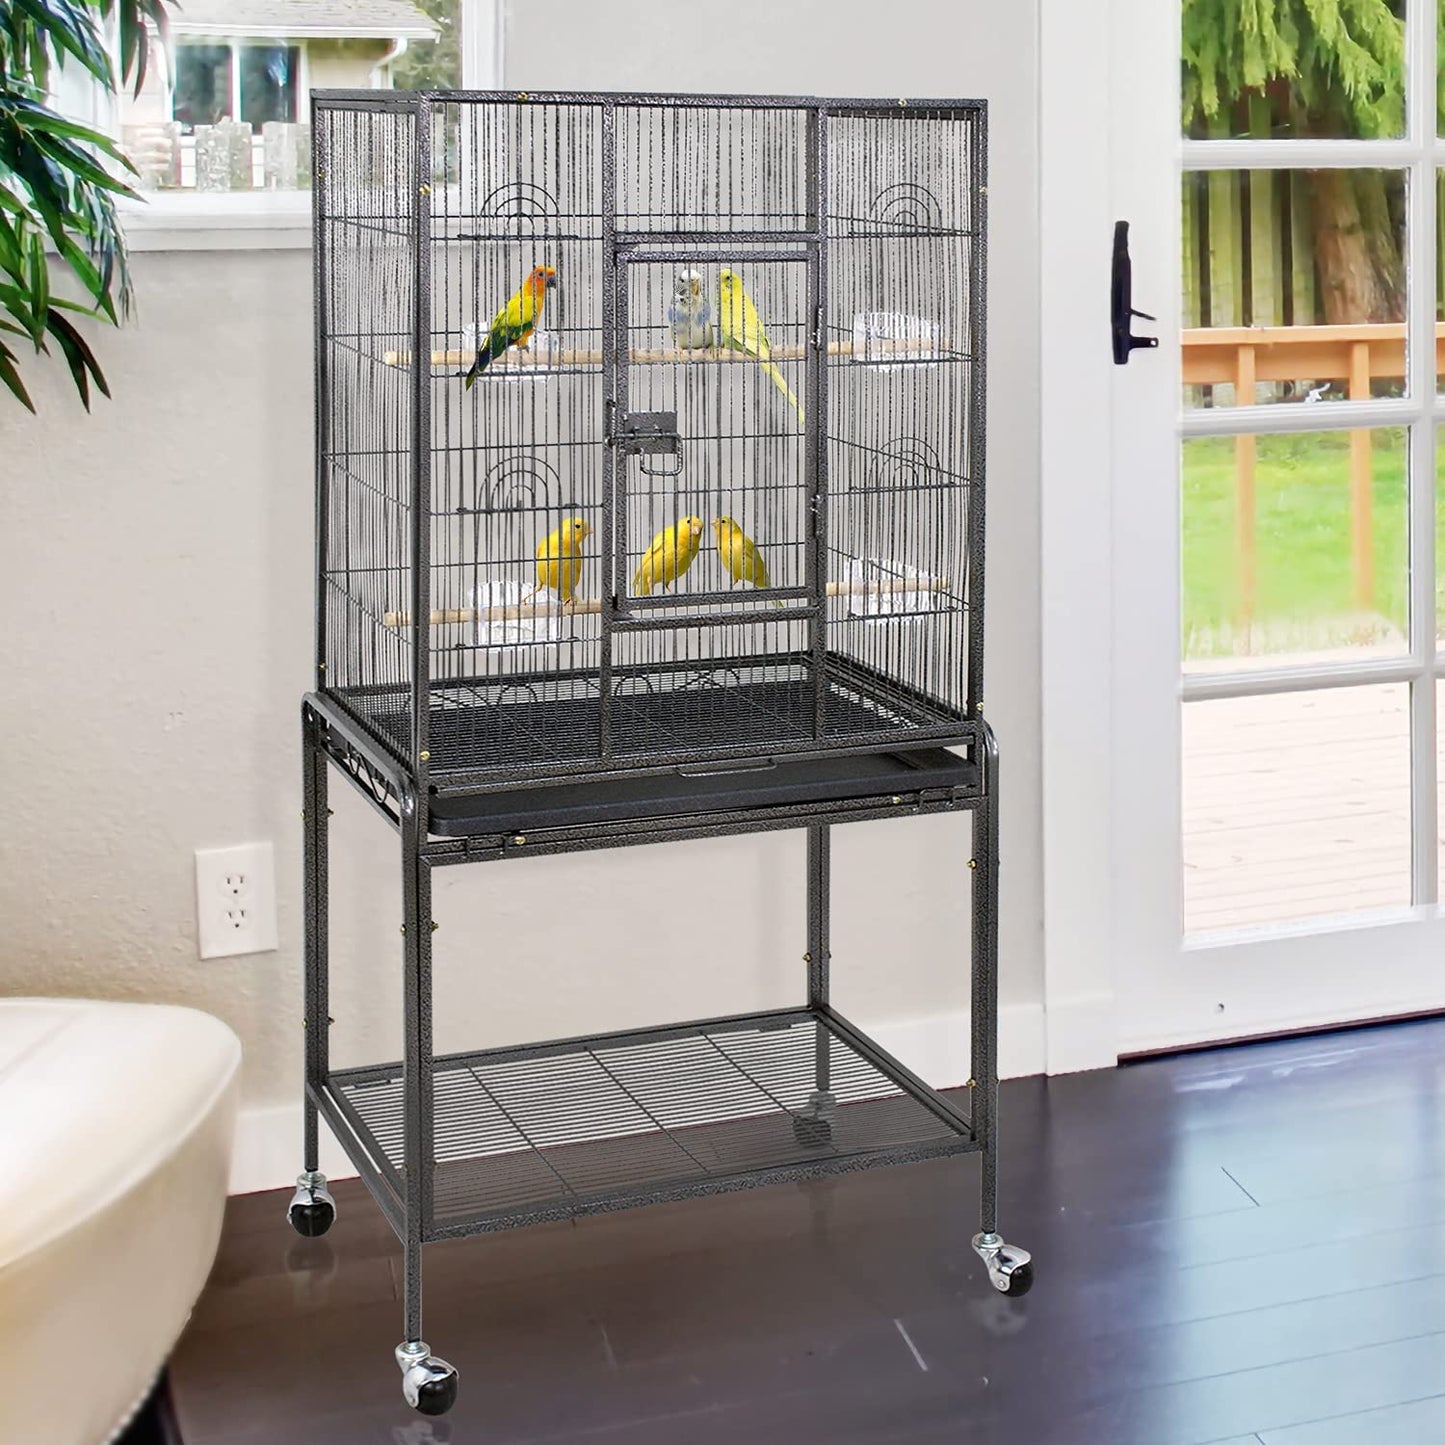 53-Inch Parakeet Bird Cage, Wrought Iron Birdcage with Rolling Stand, Pet Parrot Cage, Flight Cage for Cockatiels Parakeet Lovebird Canary Finch